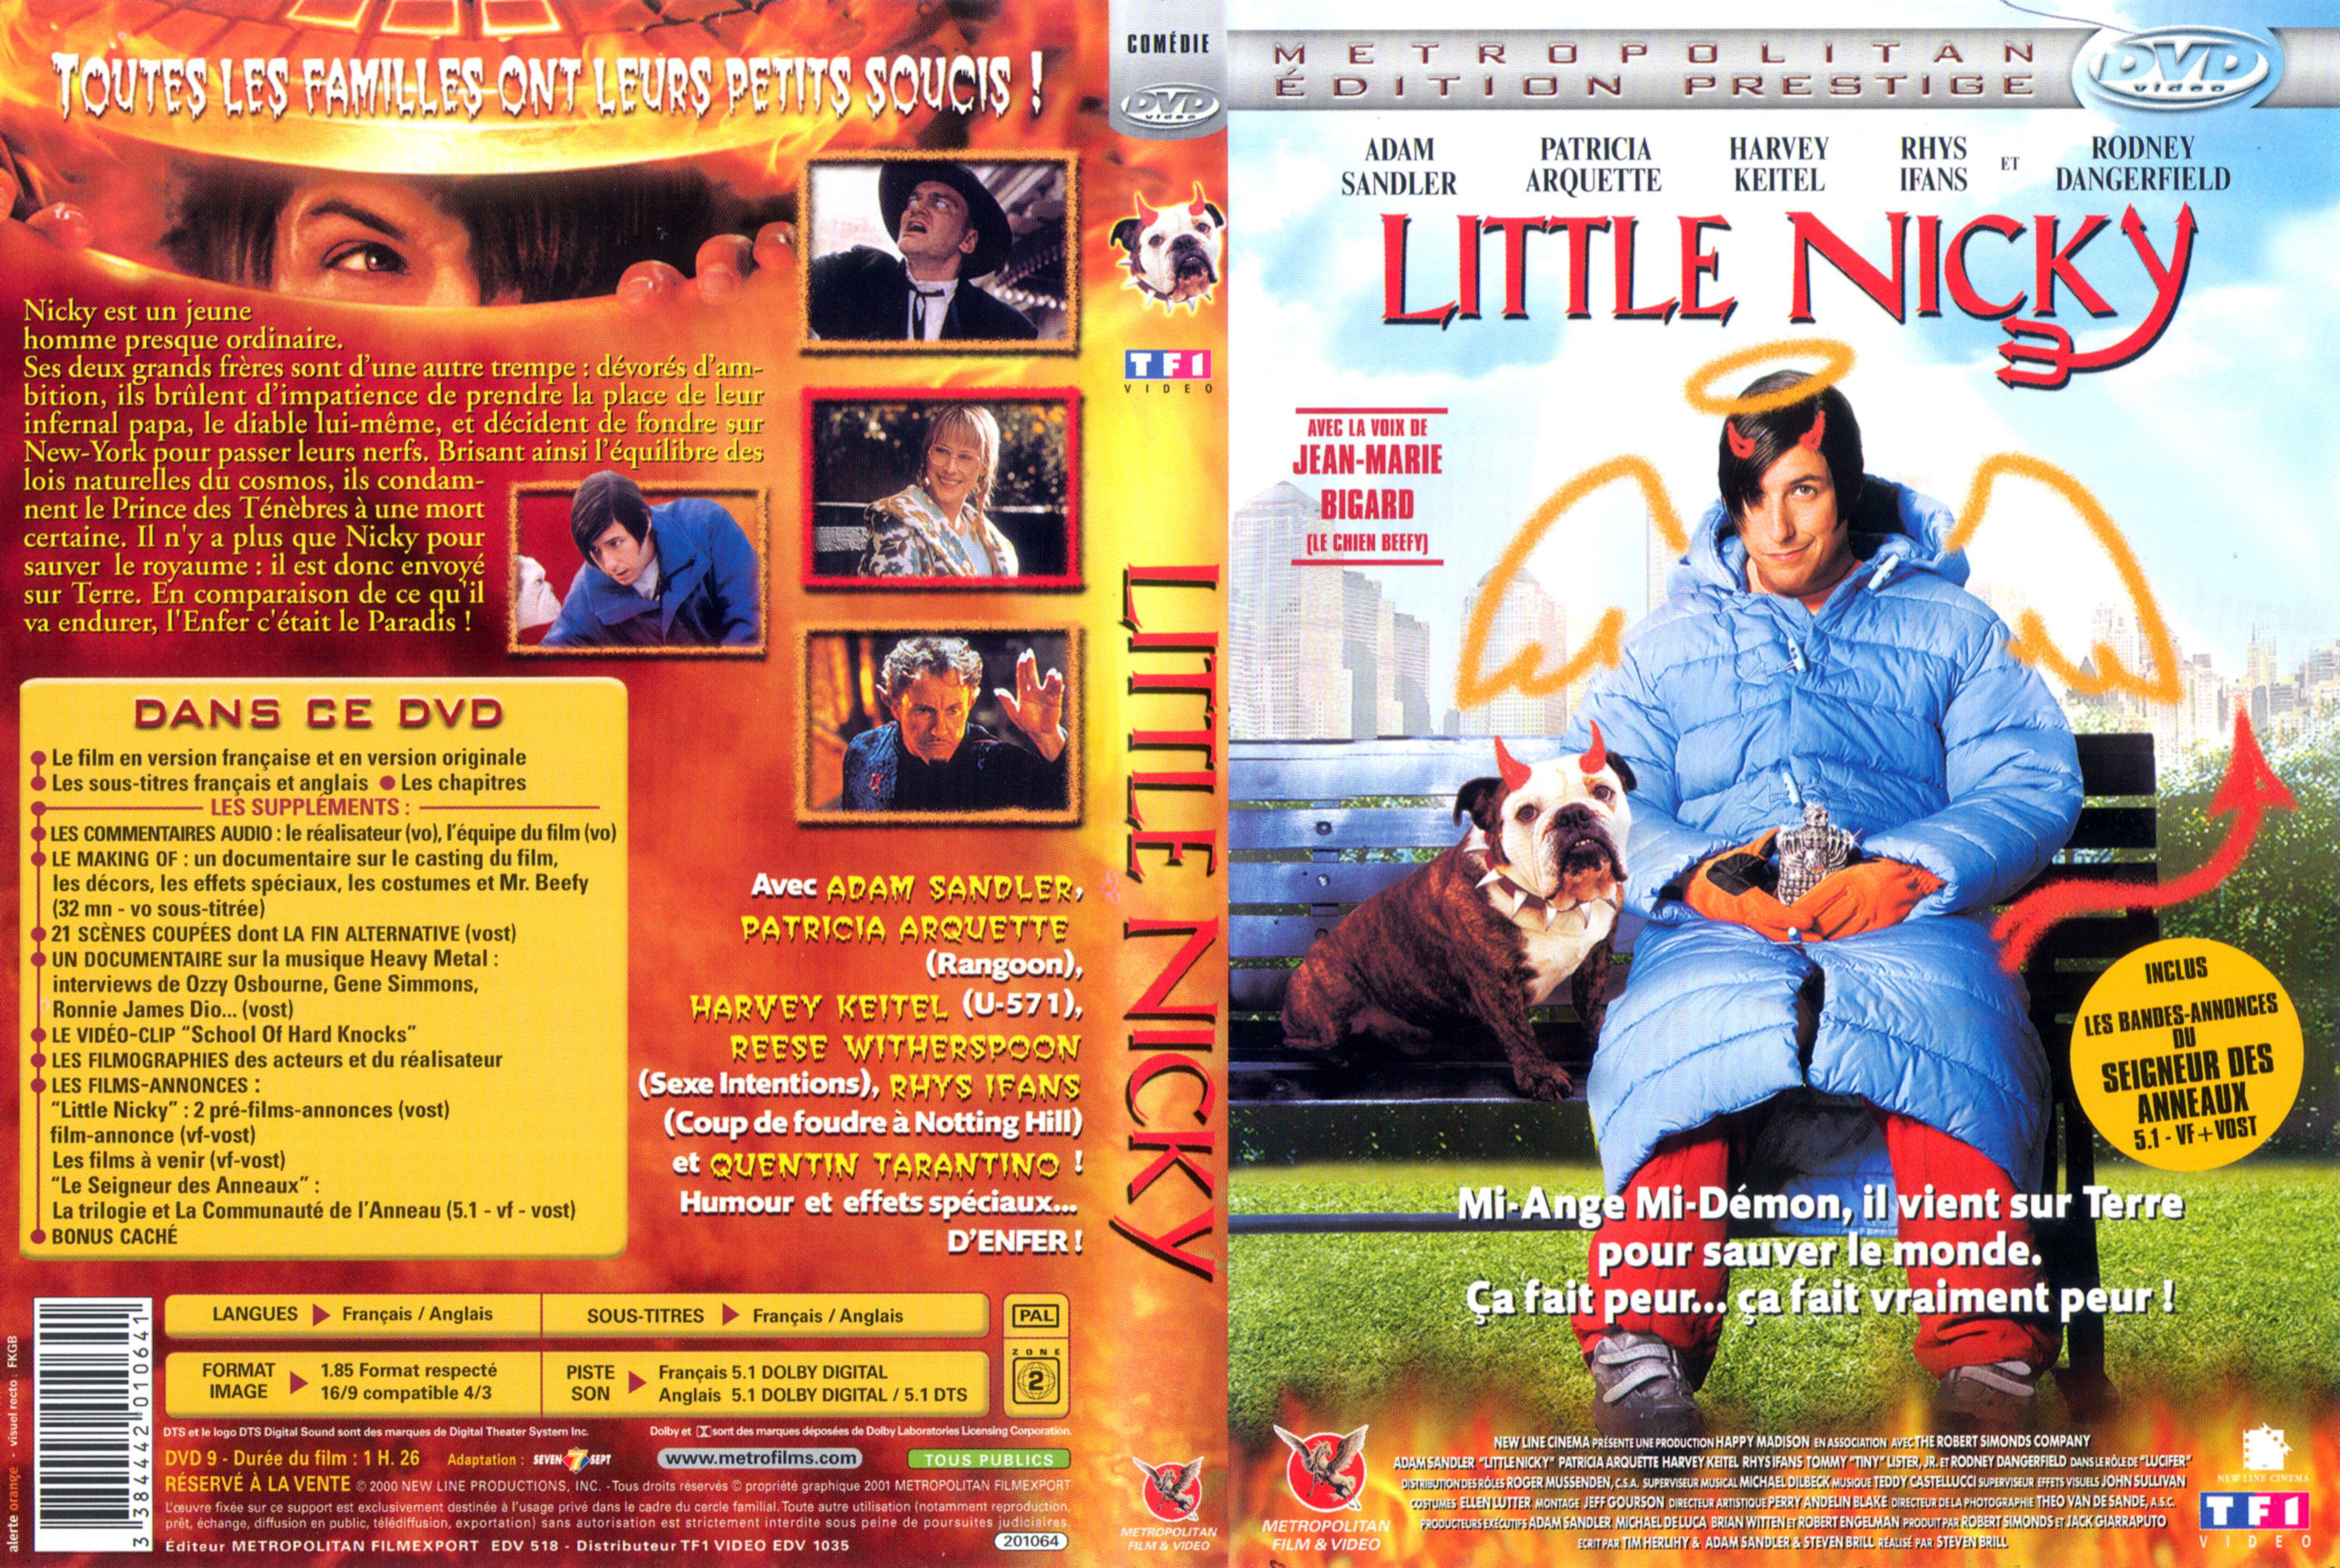 Jaquette DVD Little Nicky